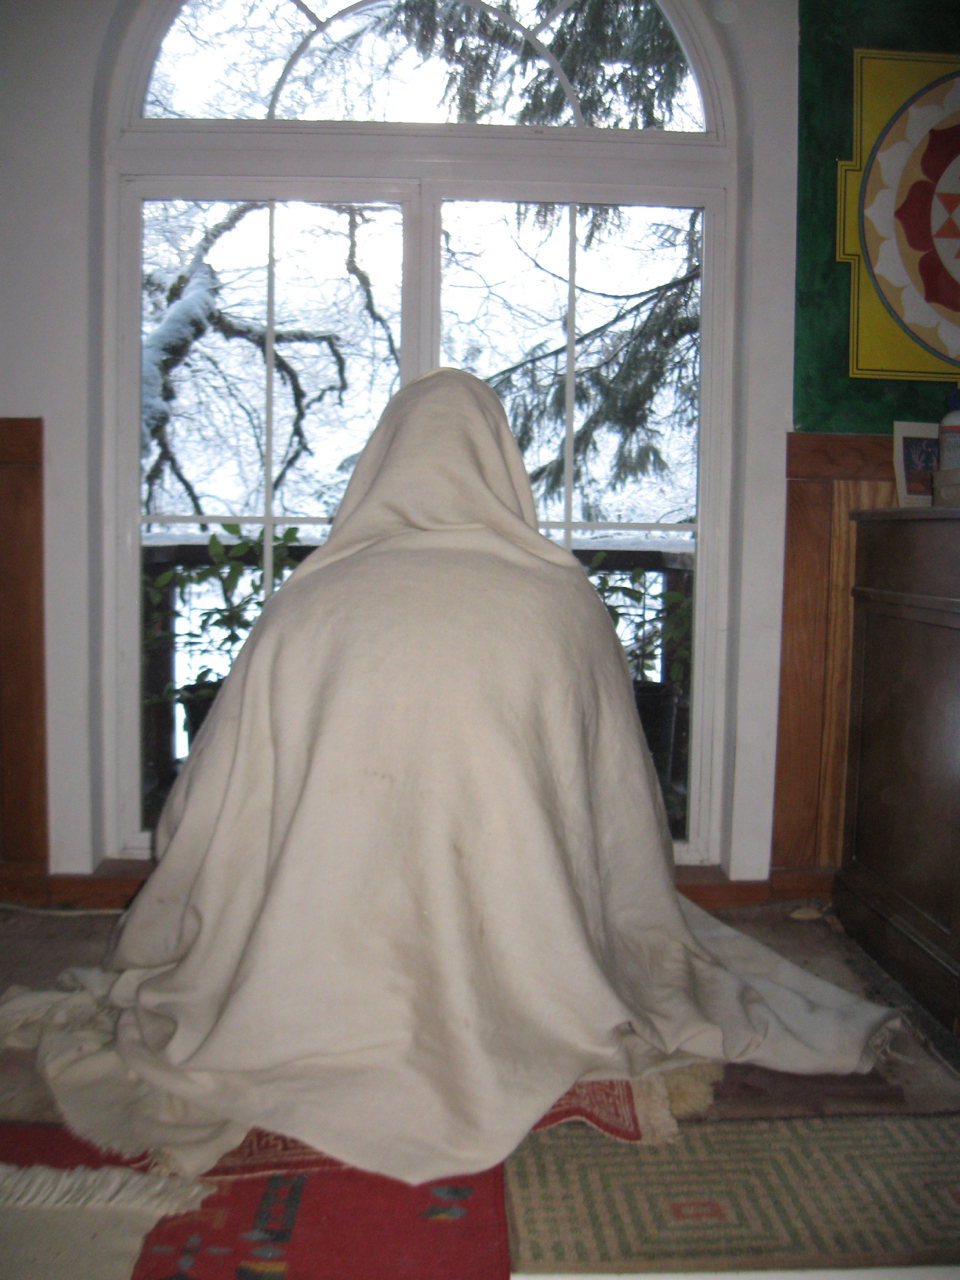 1587672949215_Swami-in-his-upstairs-meditation-spot-on-snowy-morning.jpg